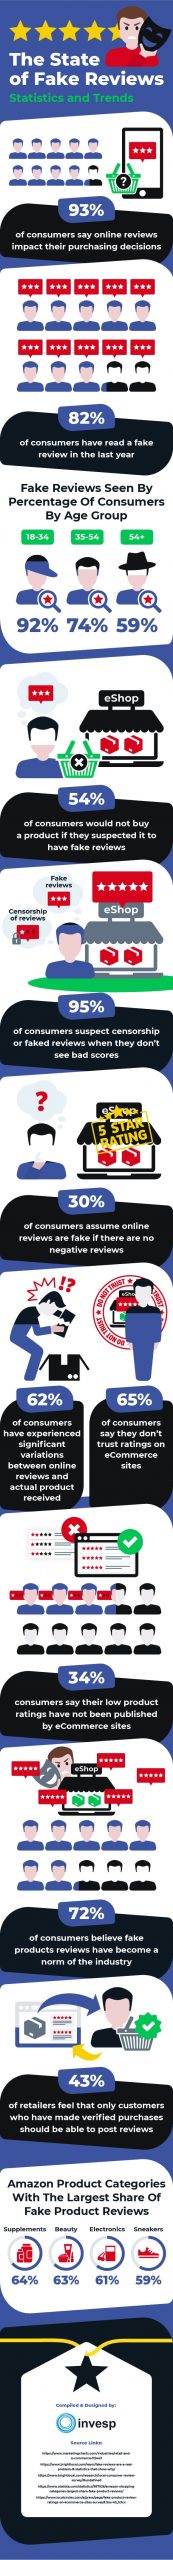 How Harmful Are Fake Online Reviews? [Infographic]